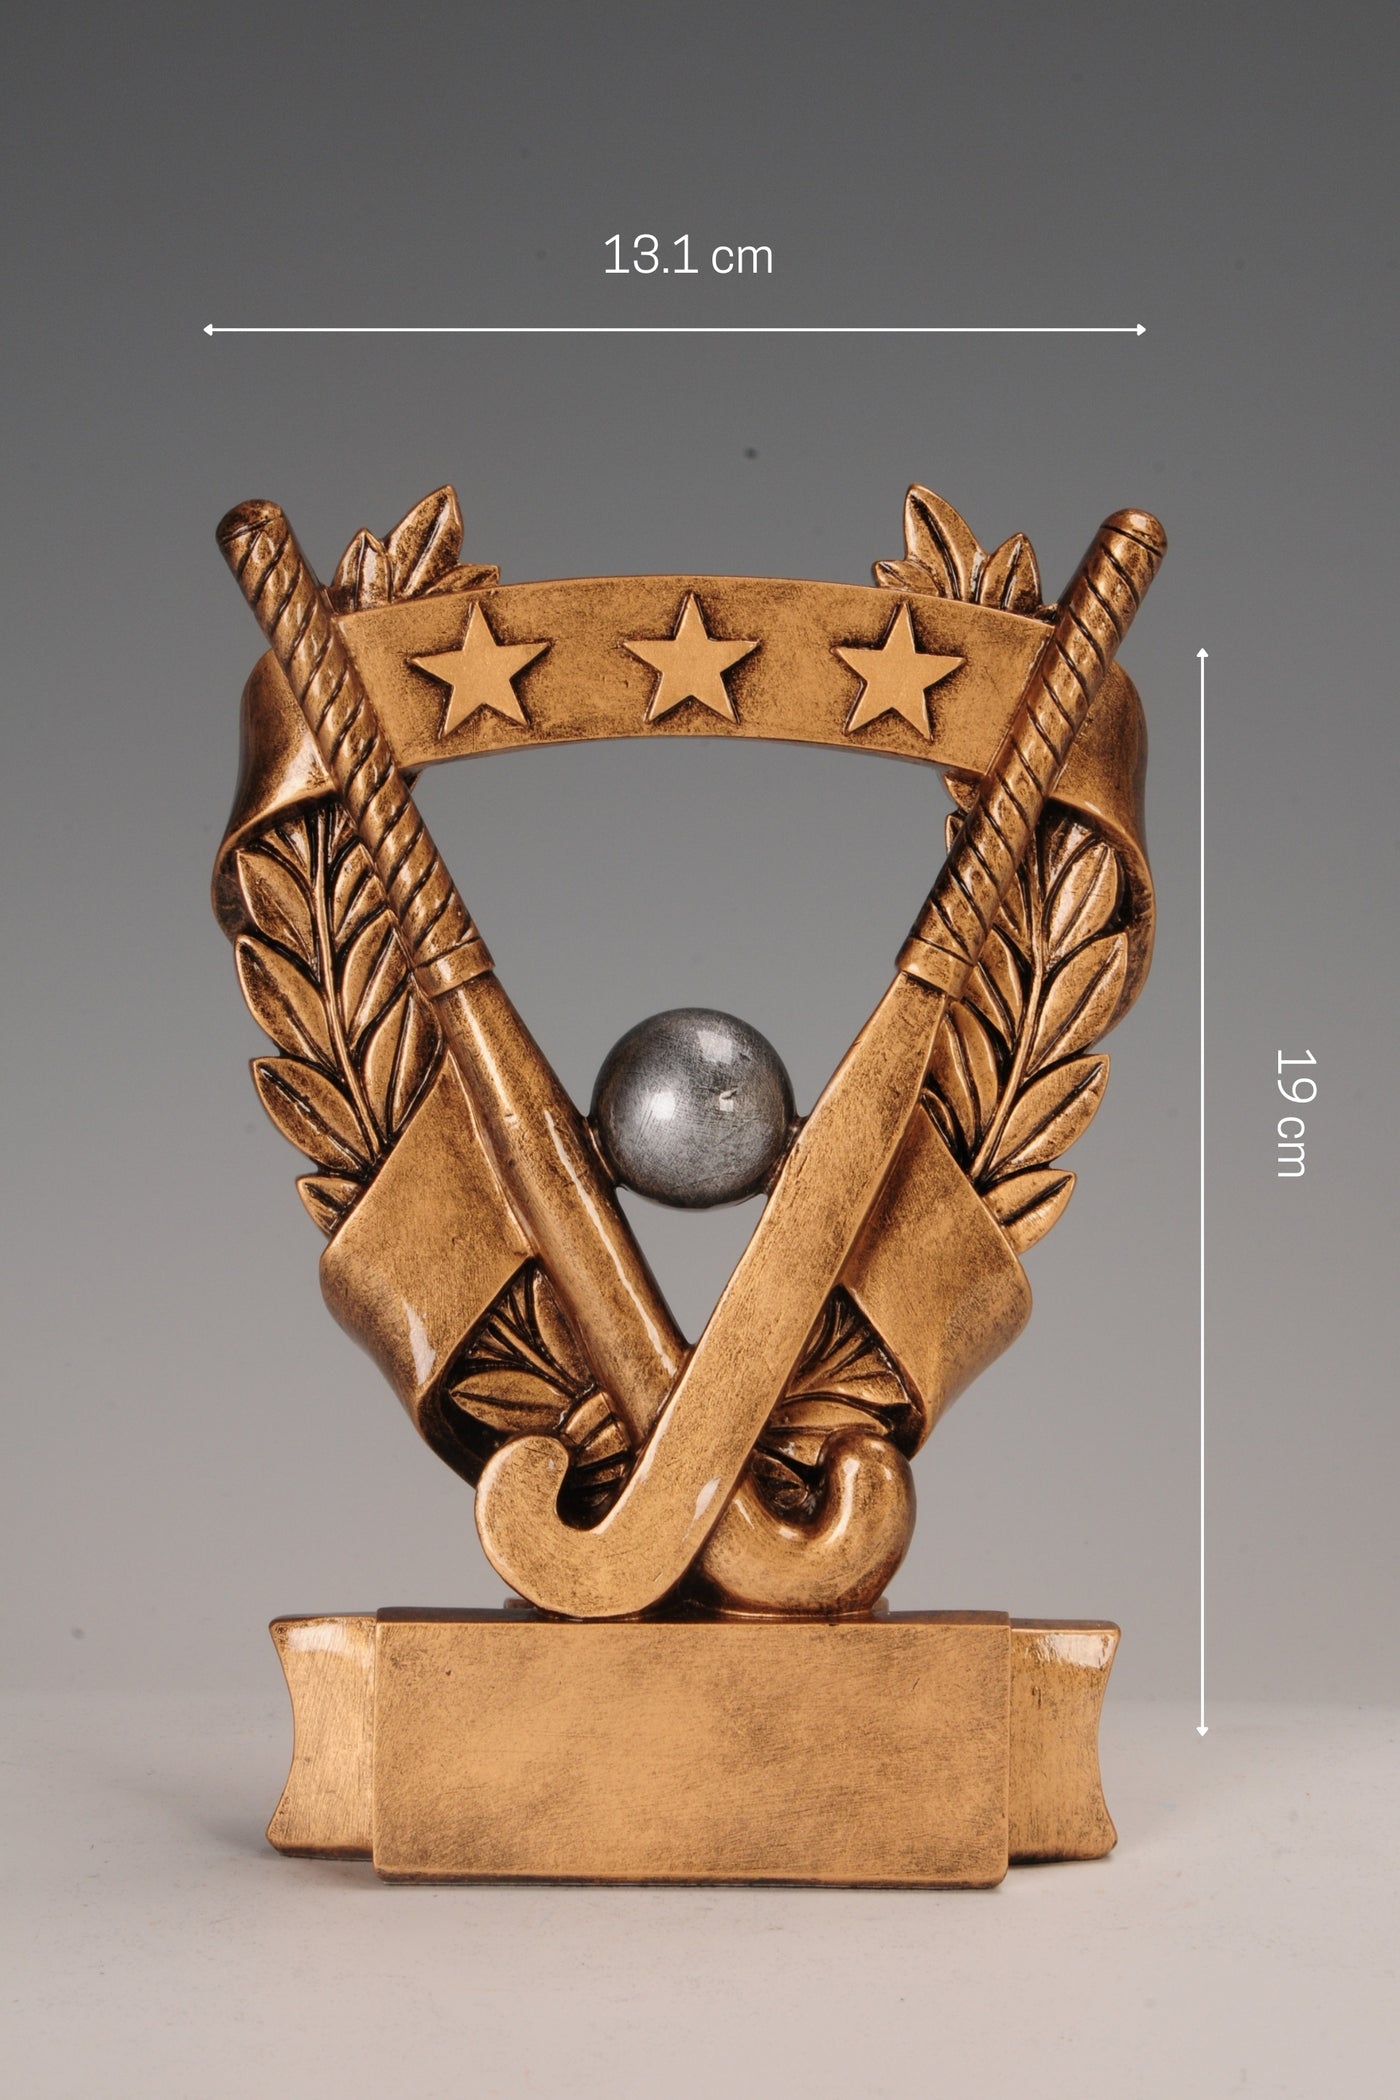 Hockey 3 Star showpiece  for your home or office decor